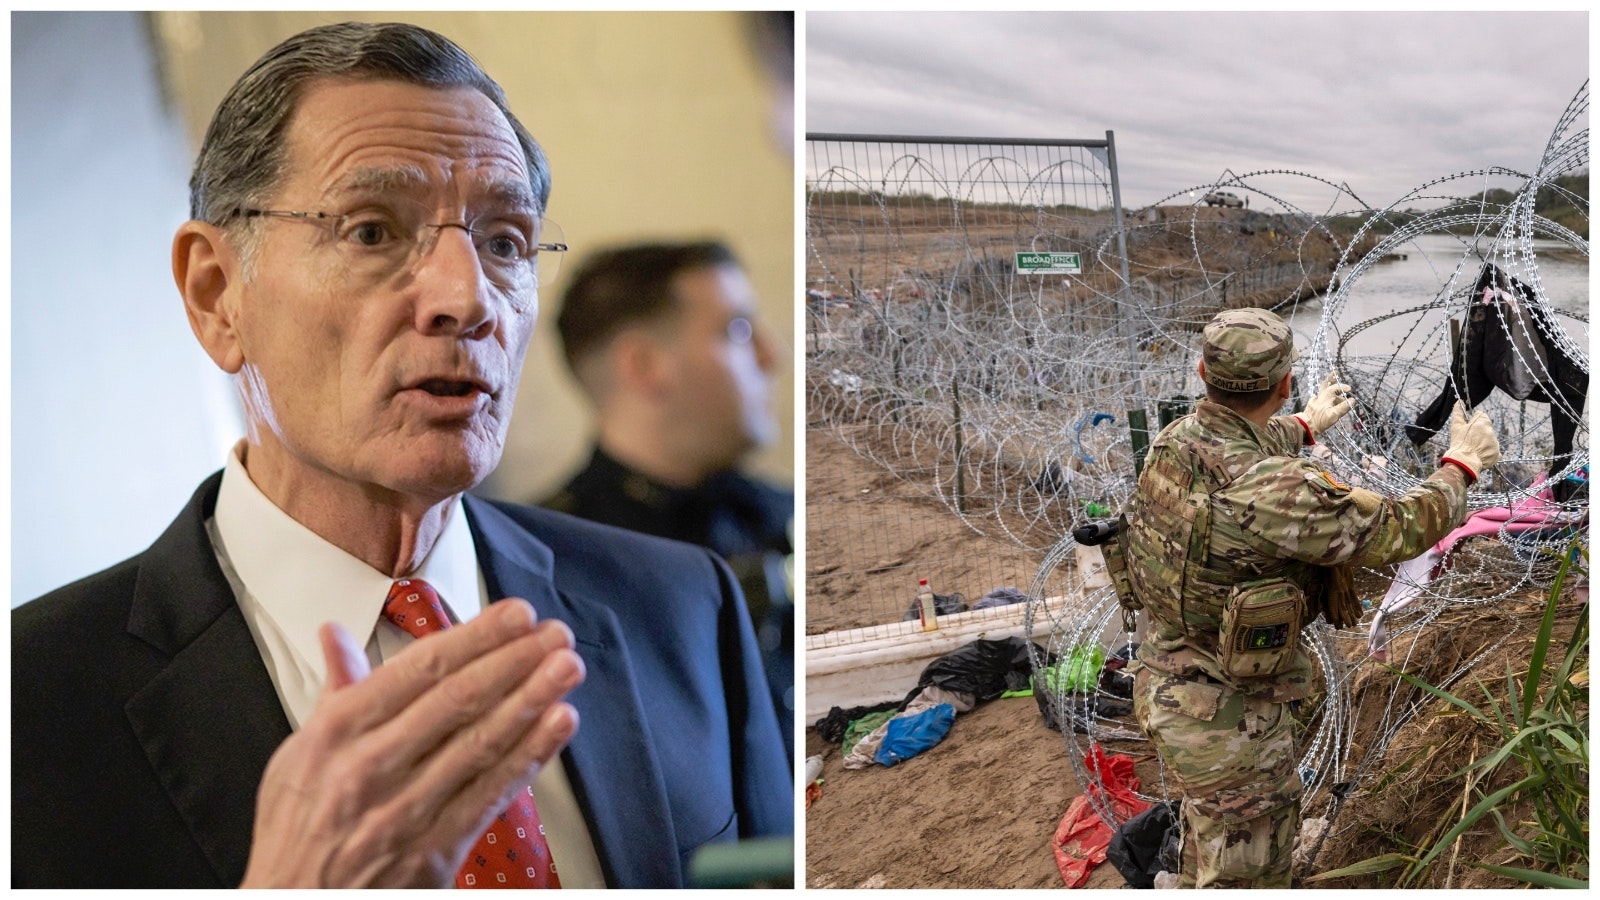 U.S. Sen. John Barrasso, R-Wyoming, voted against a controversial $95 billion foreign aid package because he said the U.S. needs to take care of securing its own borders before it gives billions to other countries to secure theirs.